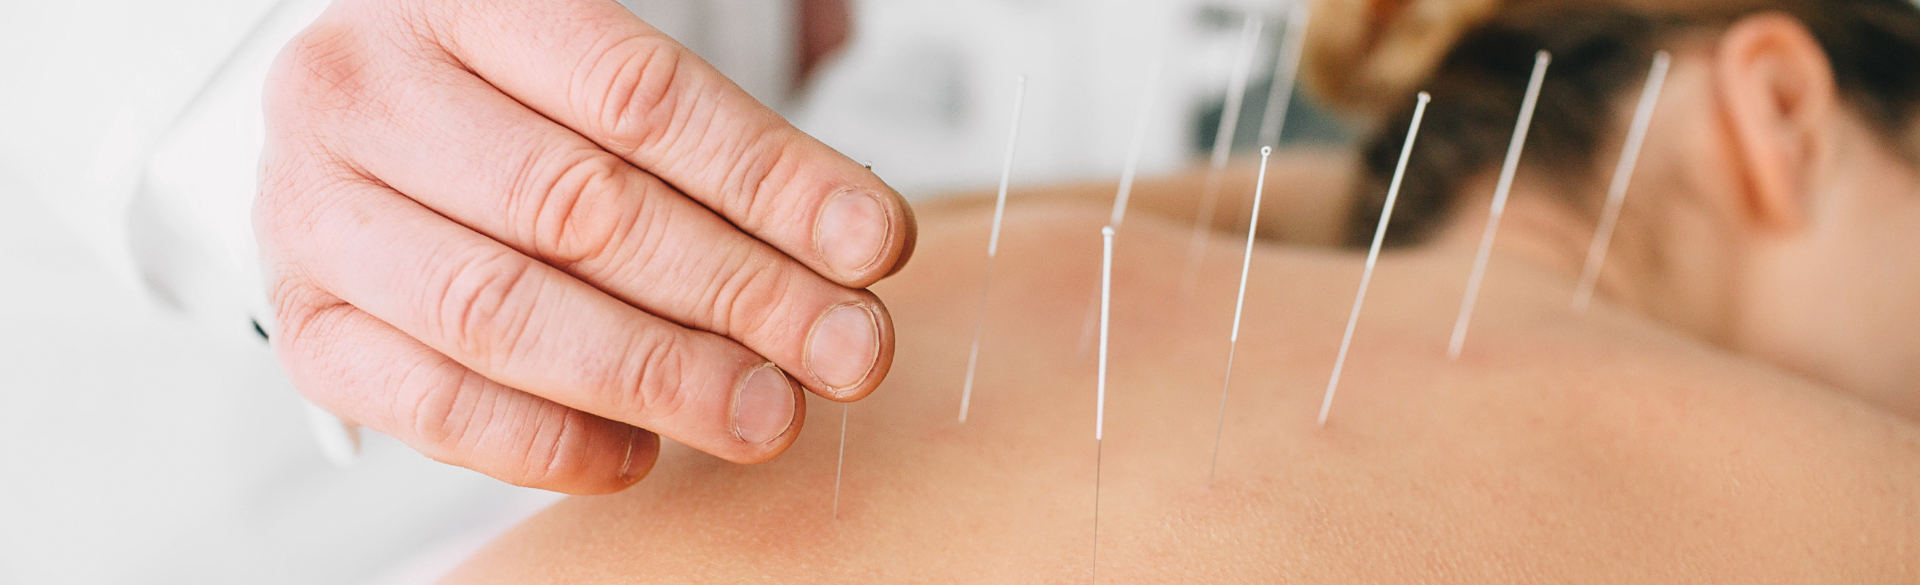 person receiving acupuncture